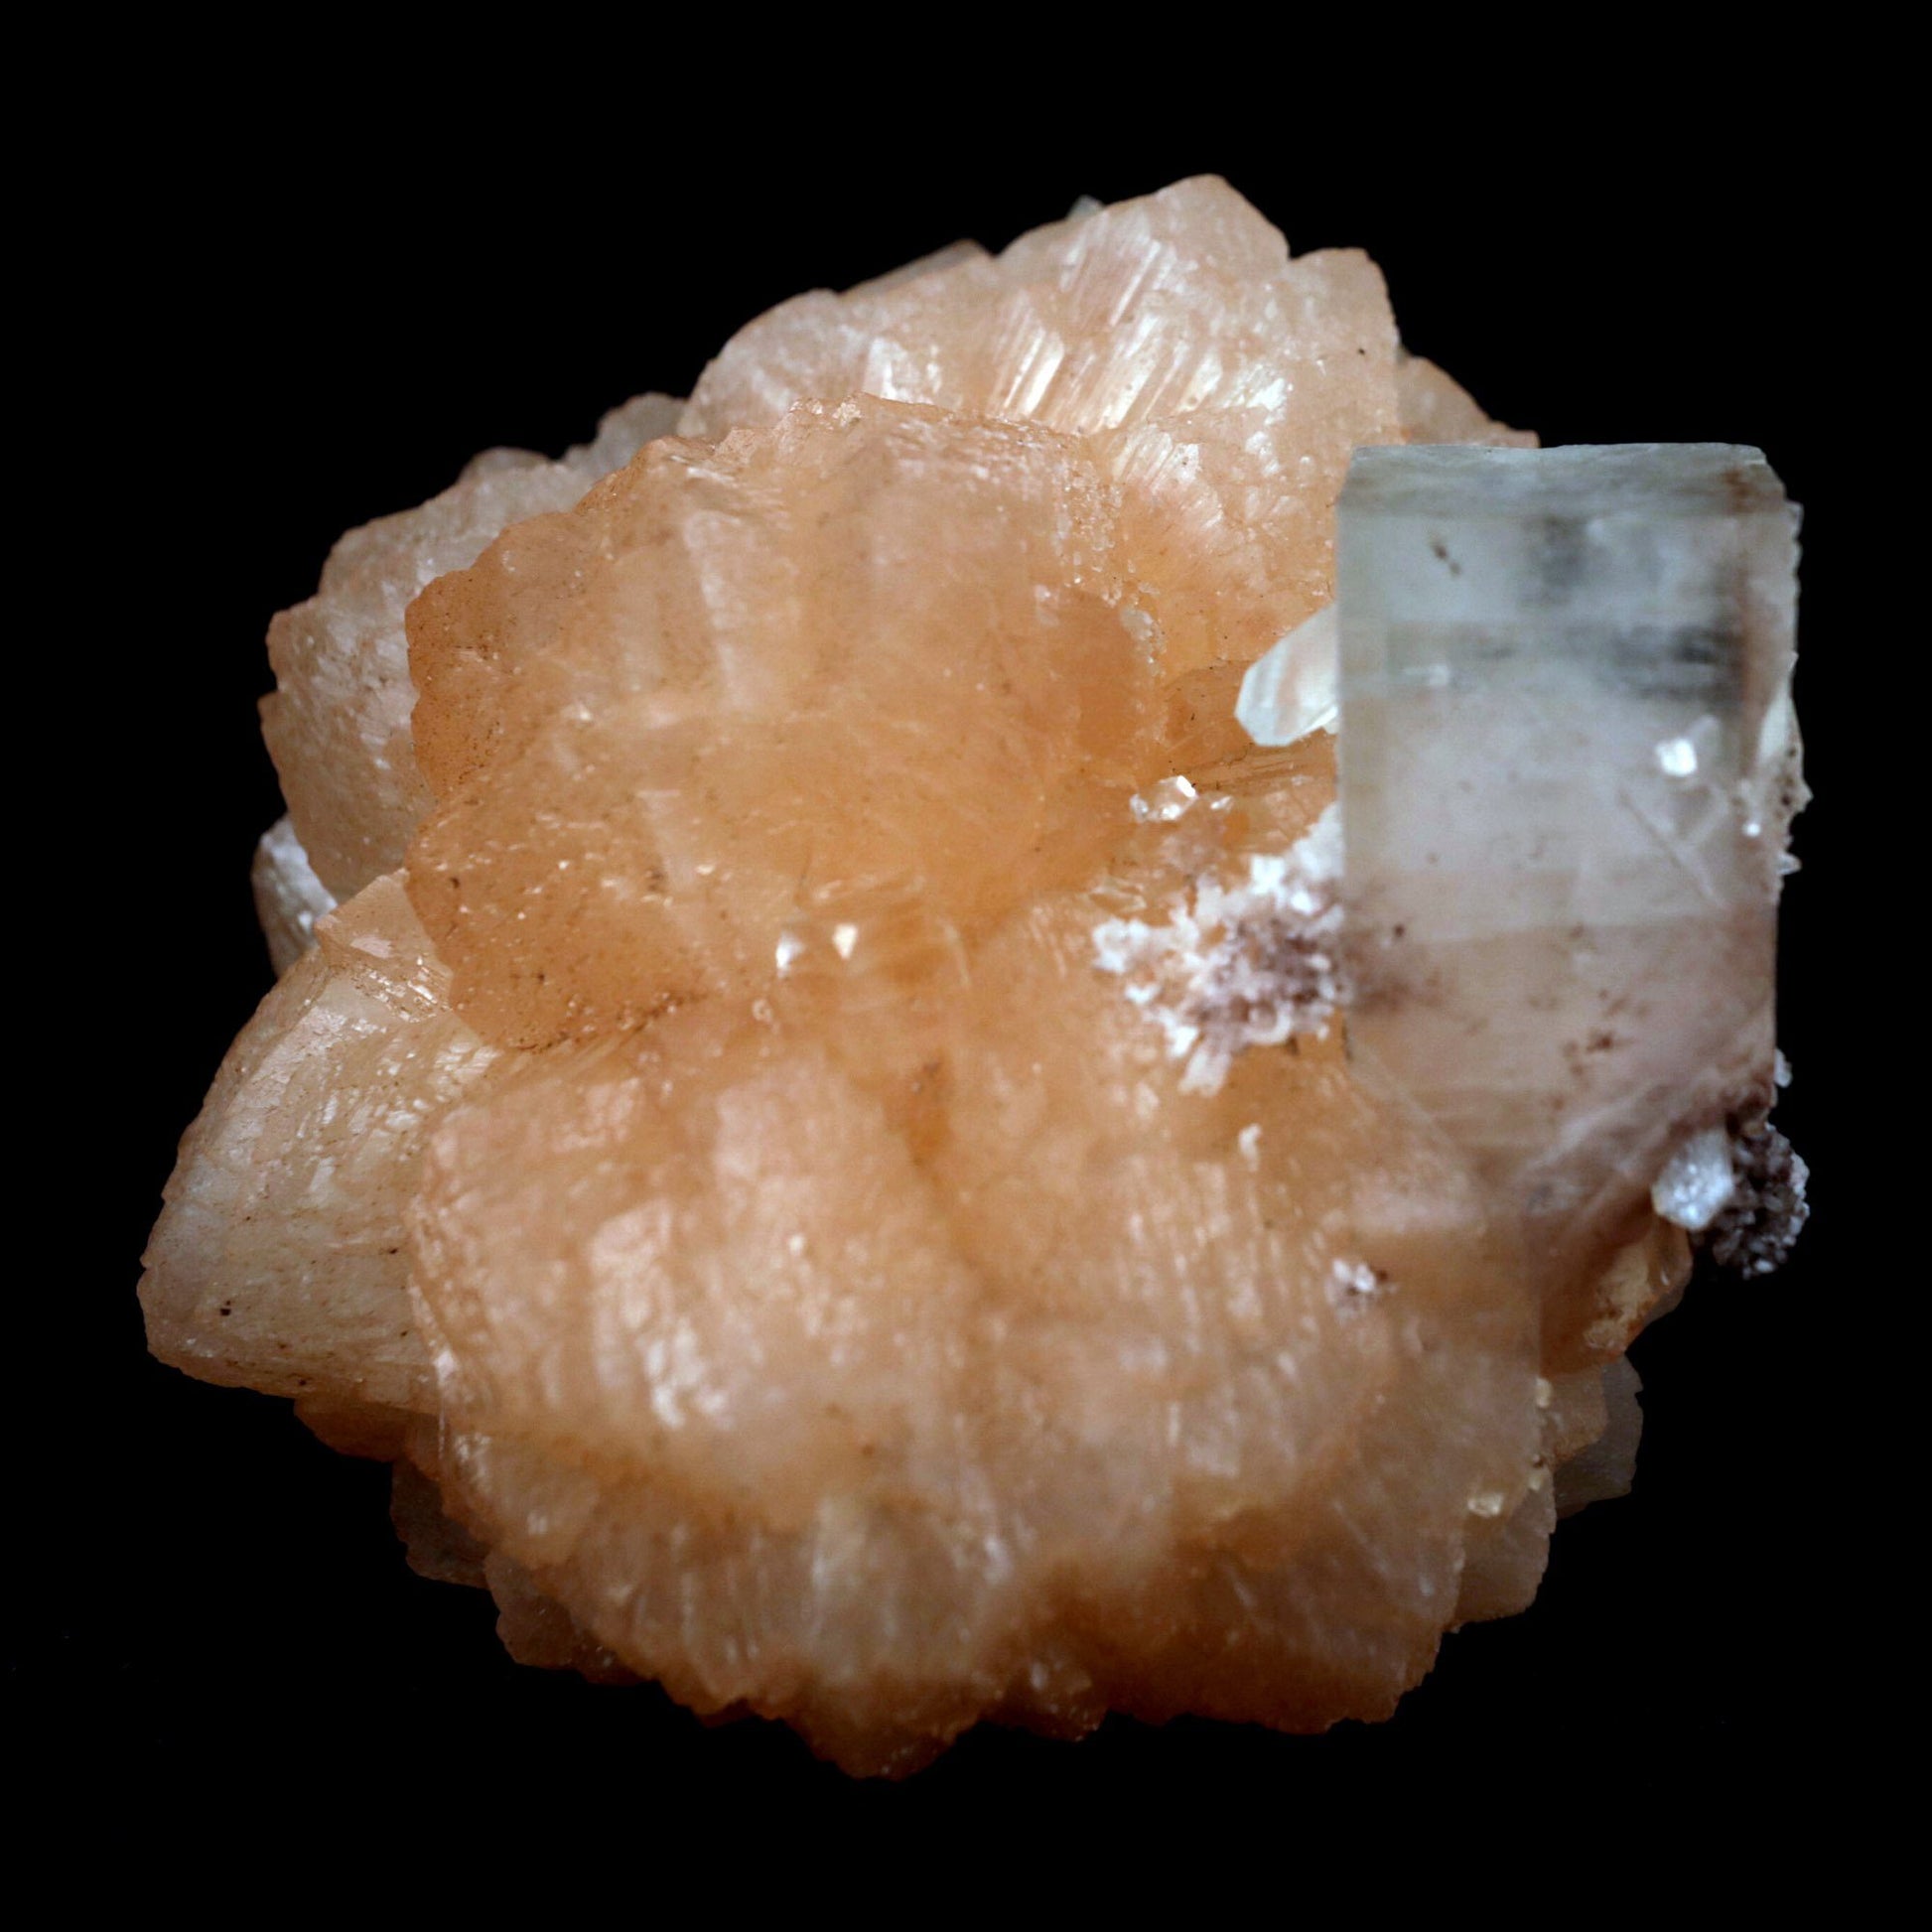 Stilbite with Apophyllite on Chalcedony Natural Mineral Specimen # B …  https://www.superbminerals.us/products/stilbite-with-apophyllite-on-chalcedony-natural-mineral-specimen-b-4800  Features: An impressive doubly terminated, lustrous salmon-pink bladed stilbite bowtie, nicely accented with side car crystals, is dramatically set on the thin basalt crust on this beautifully sculptural small cabinet from recent finds in Jalgaon. The secondary doubly terminated stilbite. Small stilbite and smaller